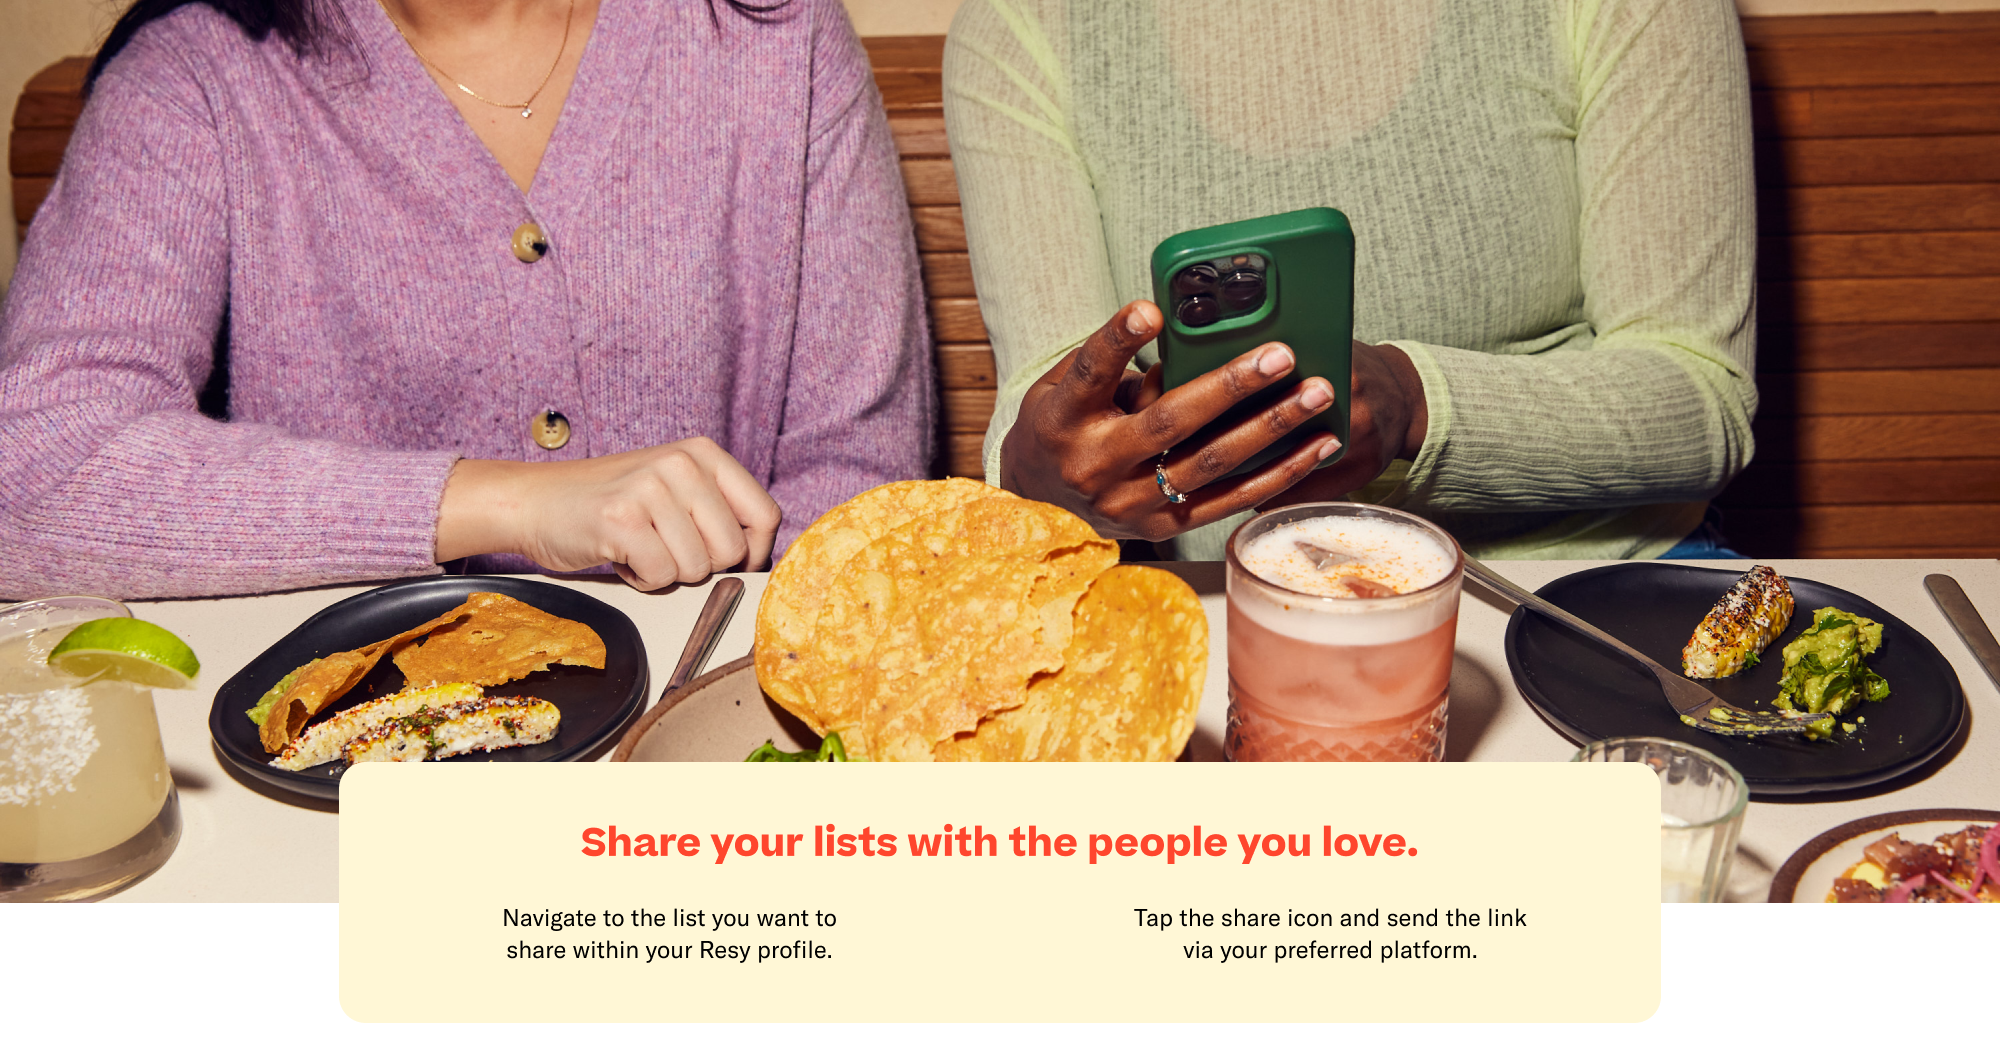 Share your lists with the people you love. Navigate to the list you want to share within your Resy profile. Tap the share icon and send the link via your preferred platform.